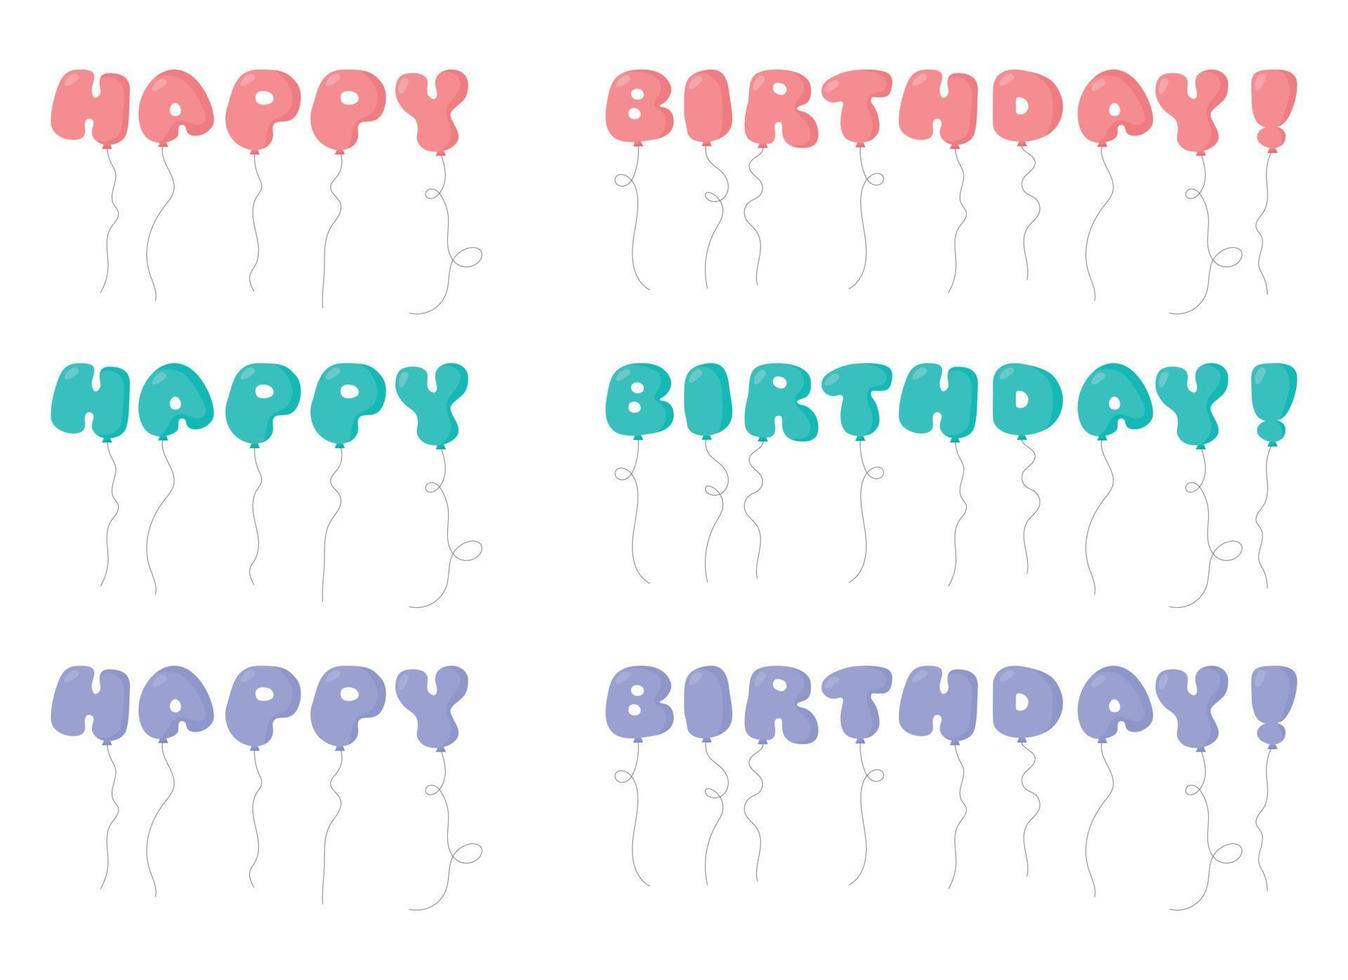 Happy Birthday party balloon text tied with strings. Vector illustration in cartoon style